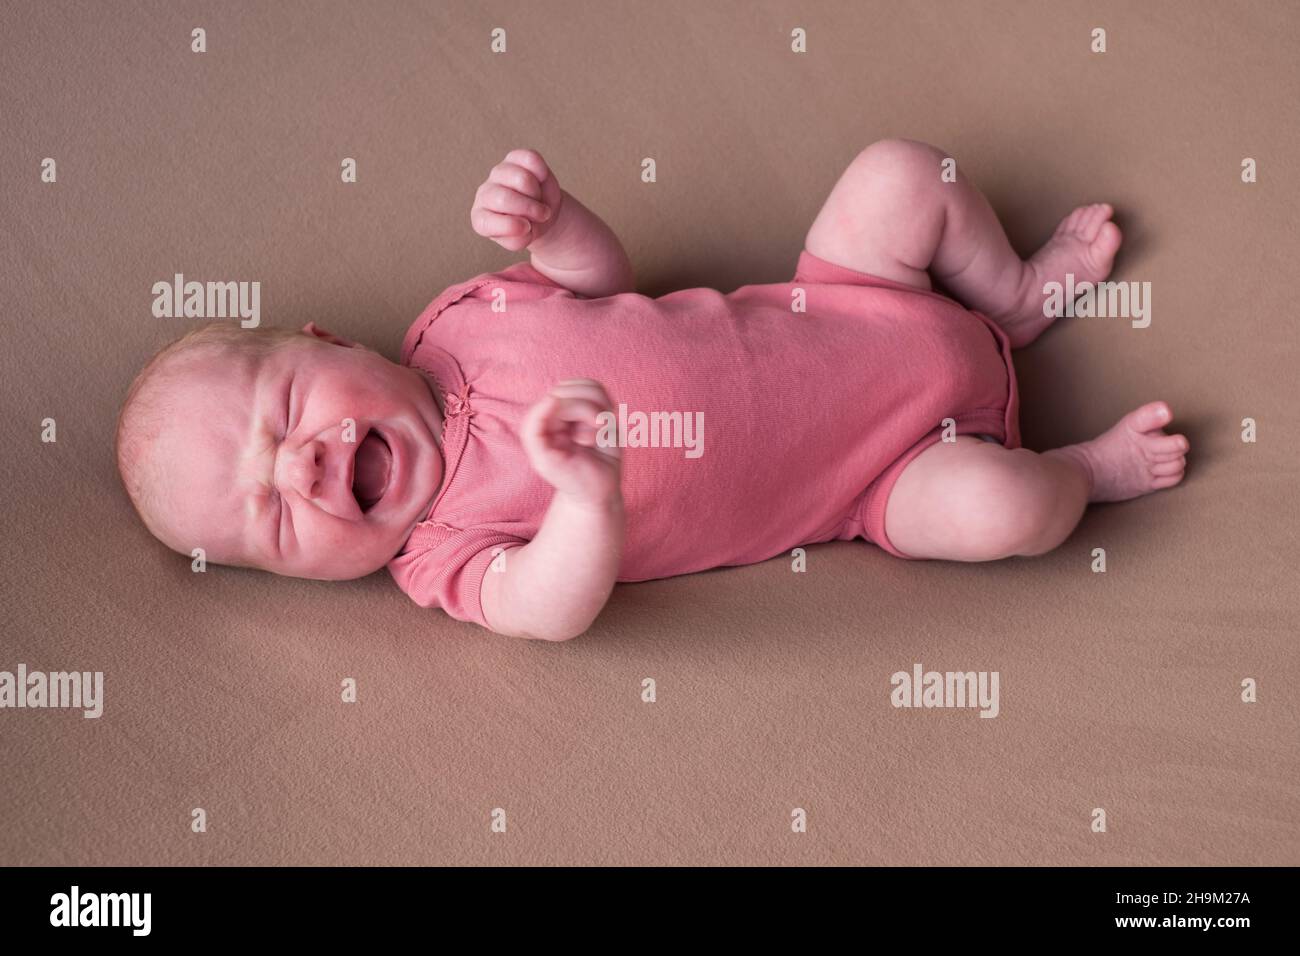 Little crying newborn baby on a brown blanket Stock Photo